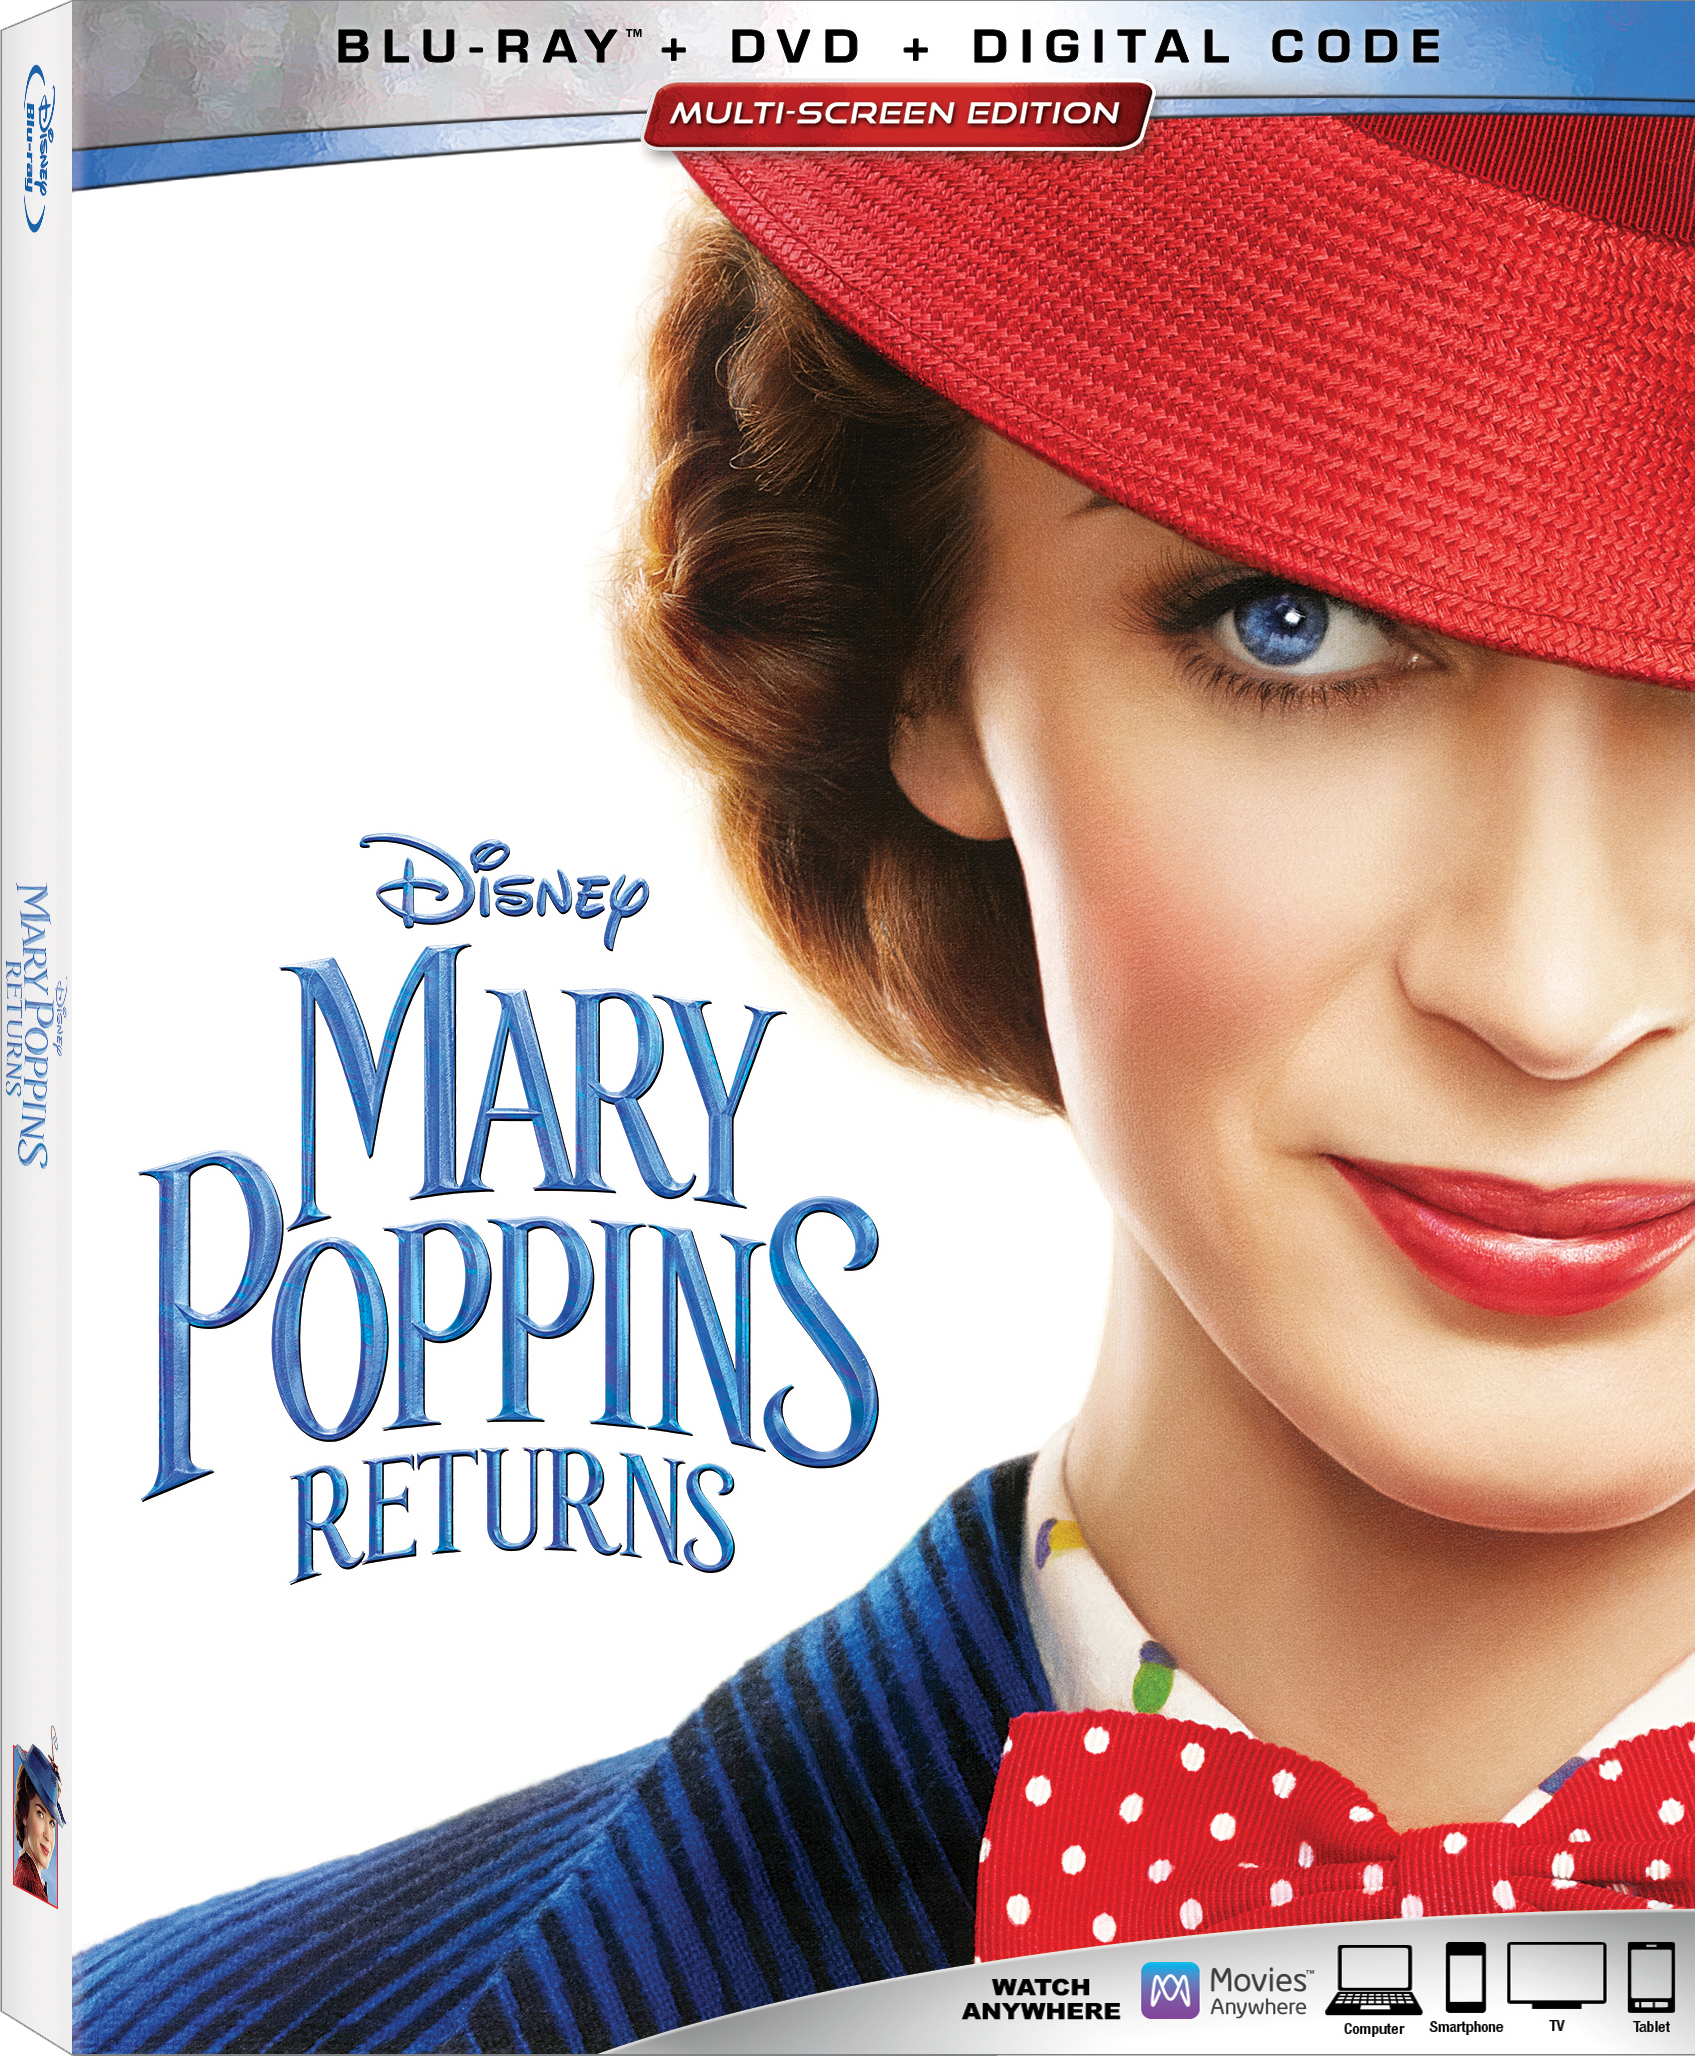 Mary Poppins Returns Blu-Ray Combo Pack cover (Walt Disney Studios Home Entertainment)